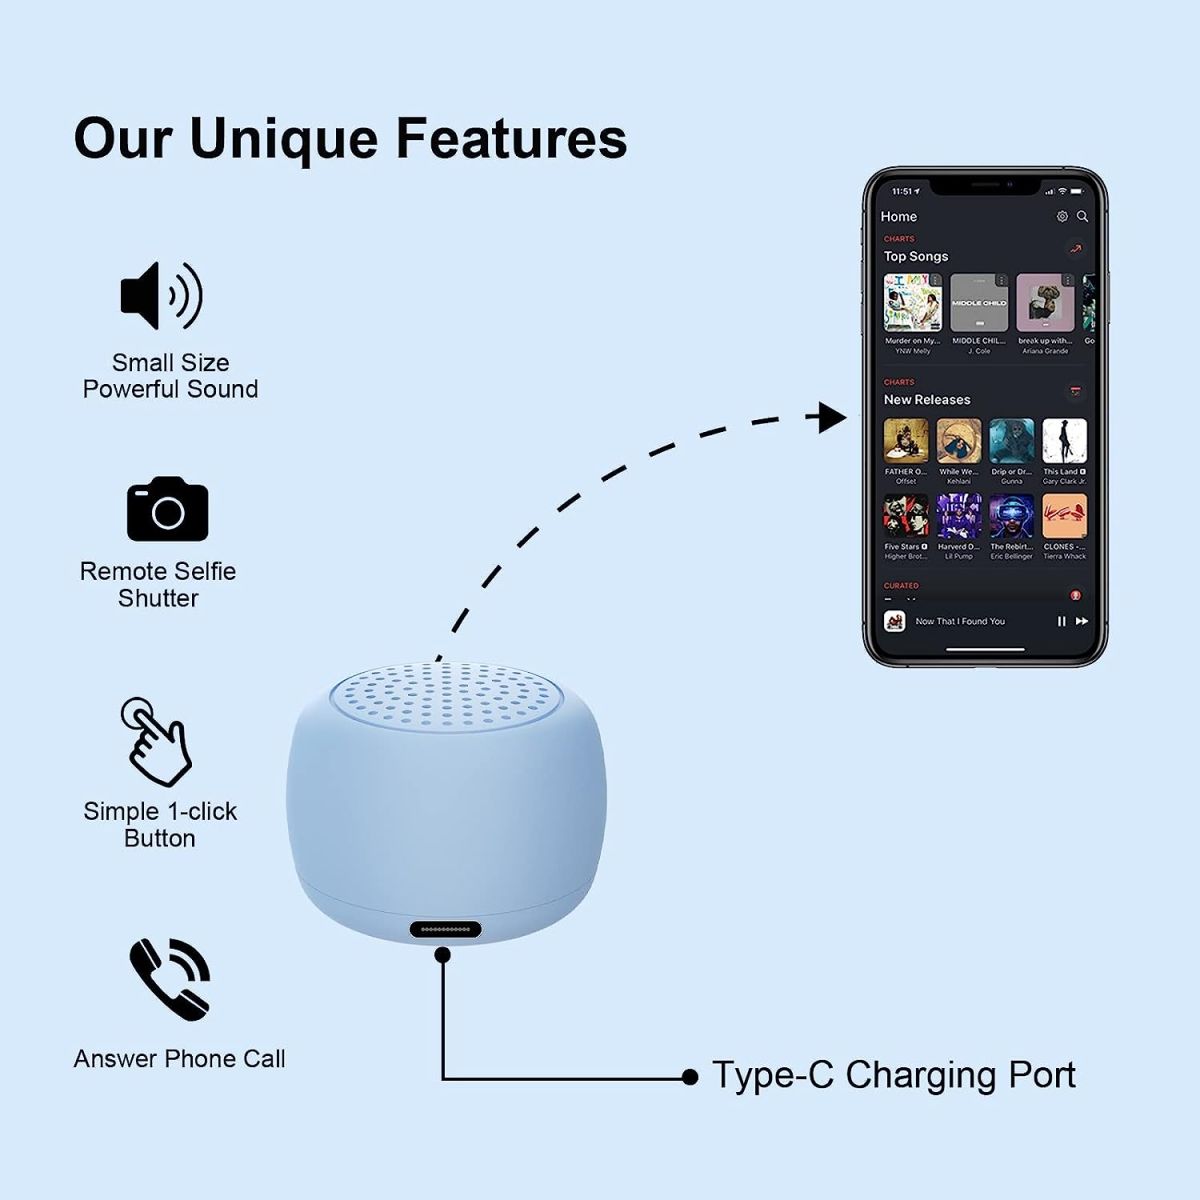 MOMOHO The Smallest Mini Bluetooth Speaker BTS0011 Wireless Small Bluetooth Speaker,Portable Speakers for Home/Outdoor/Travel/Party, Gift (Blue)